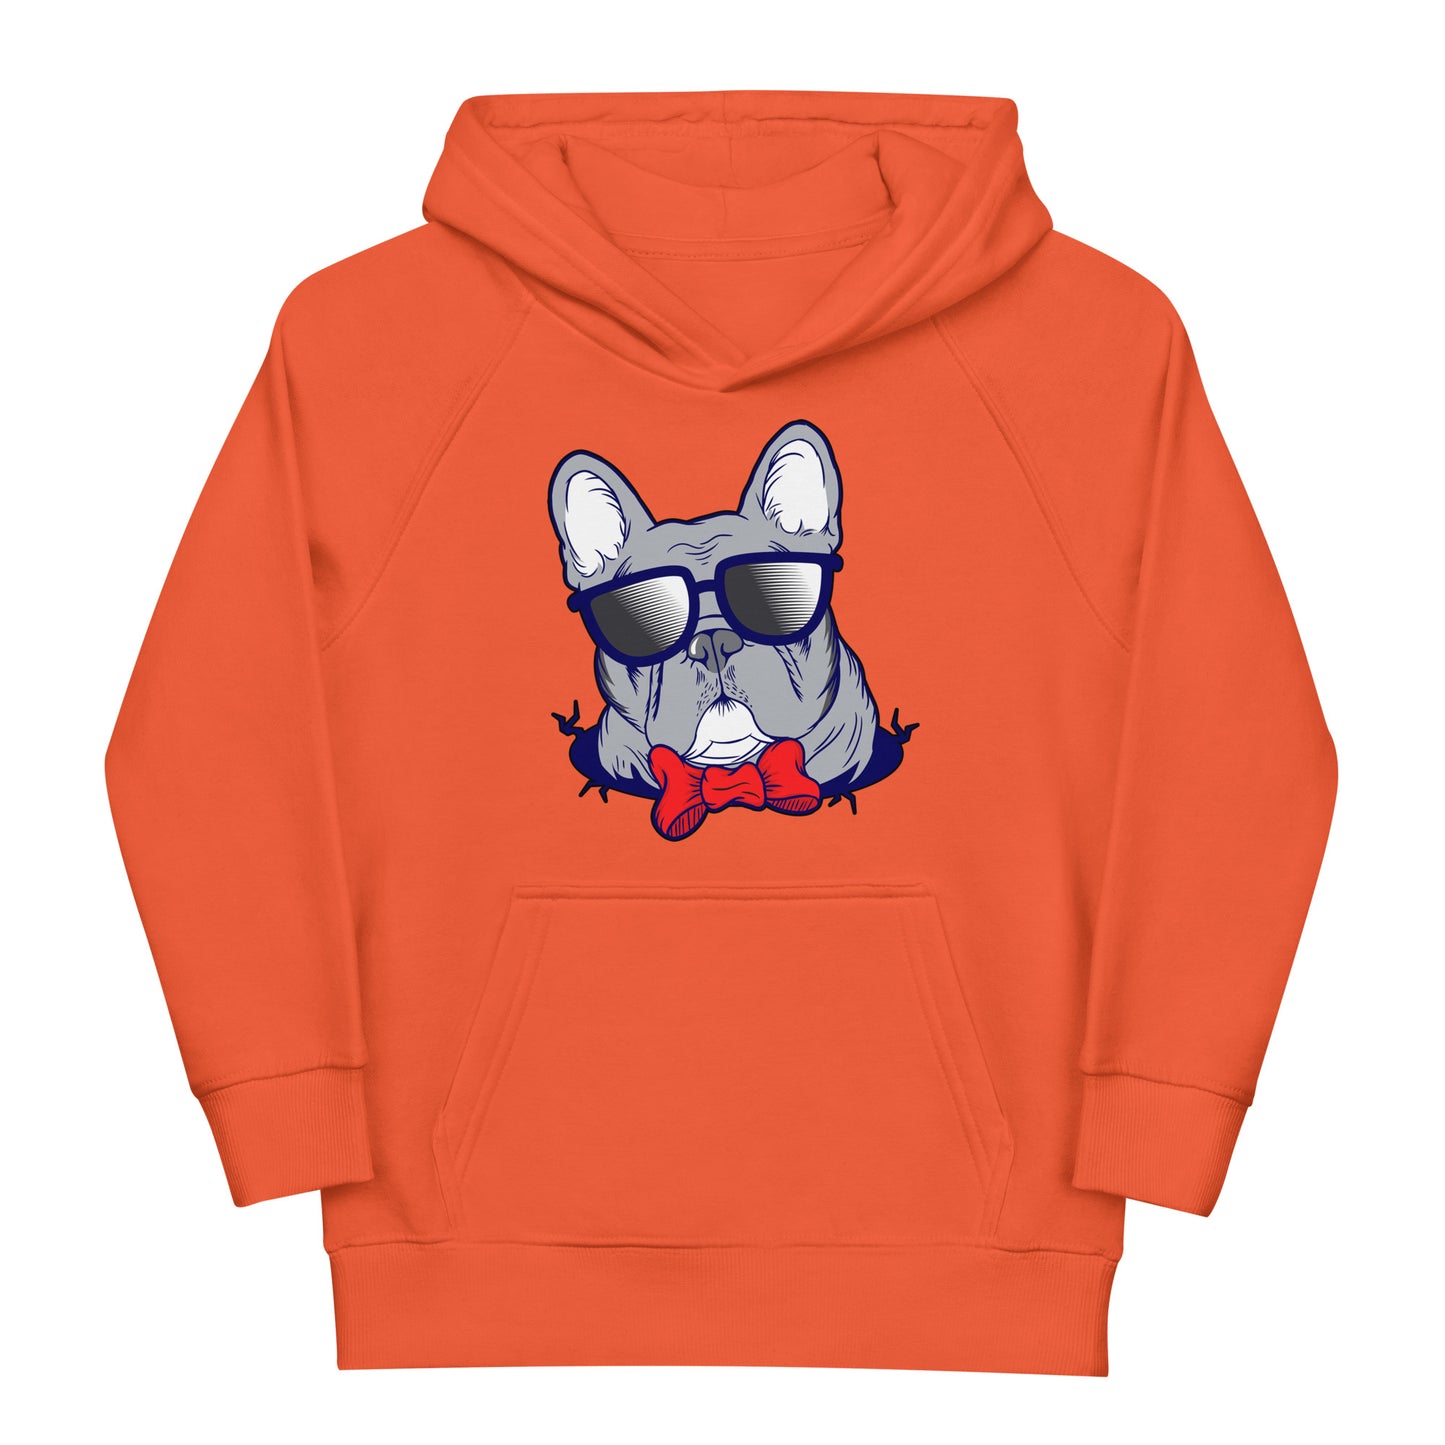 Cool French Bulldog Dog with Glasses Hoodie, No. 0579